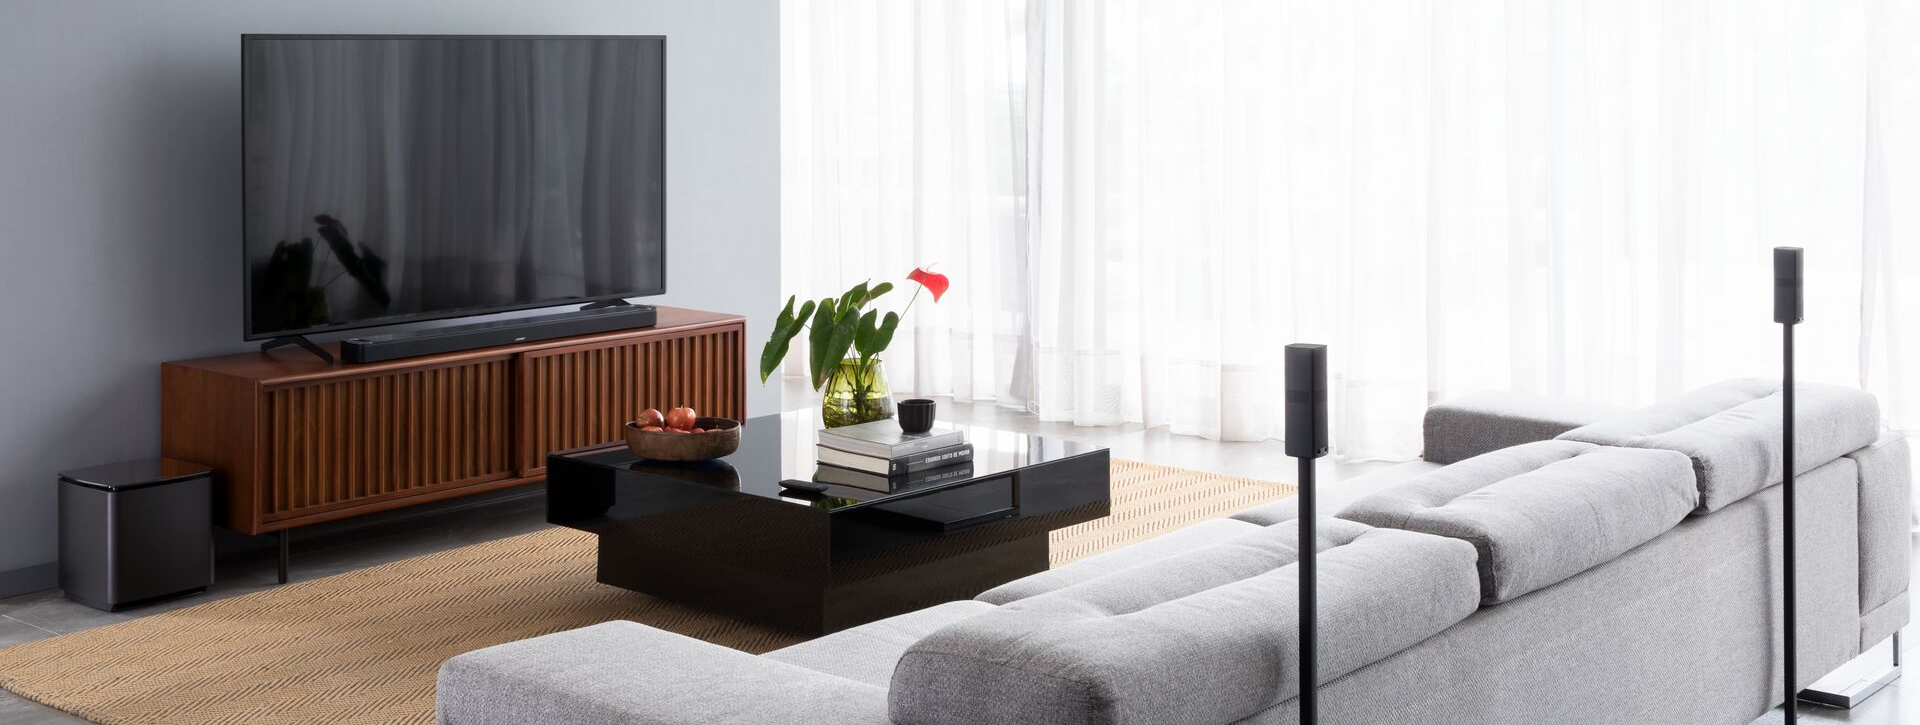 Bose Home Theater Speakers Systems